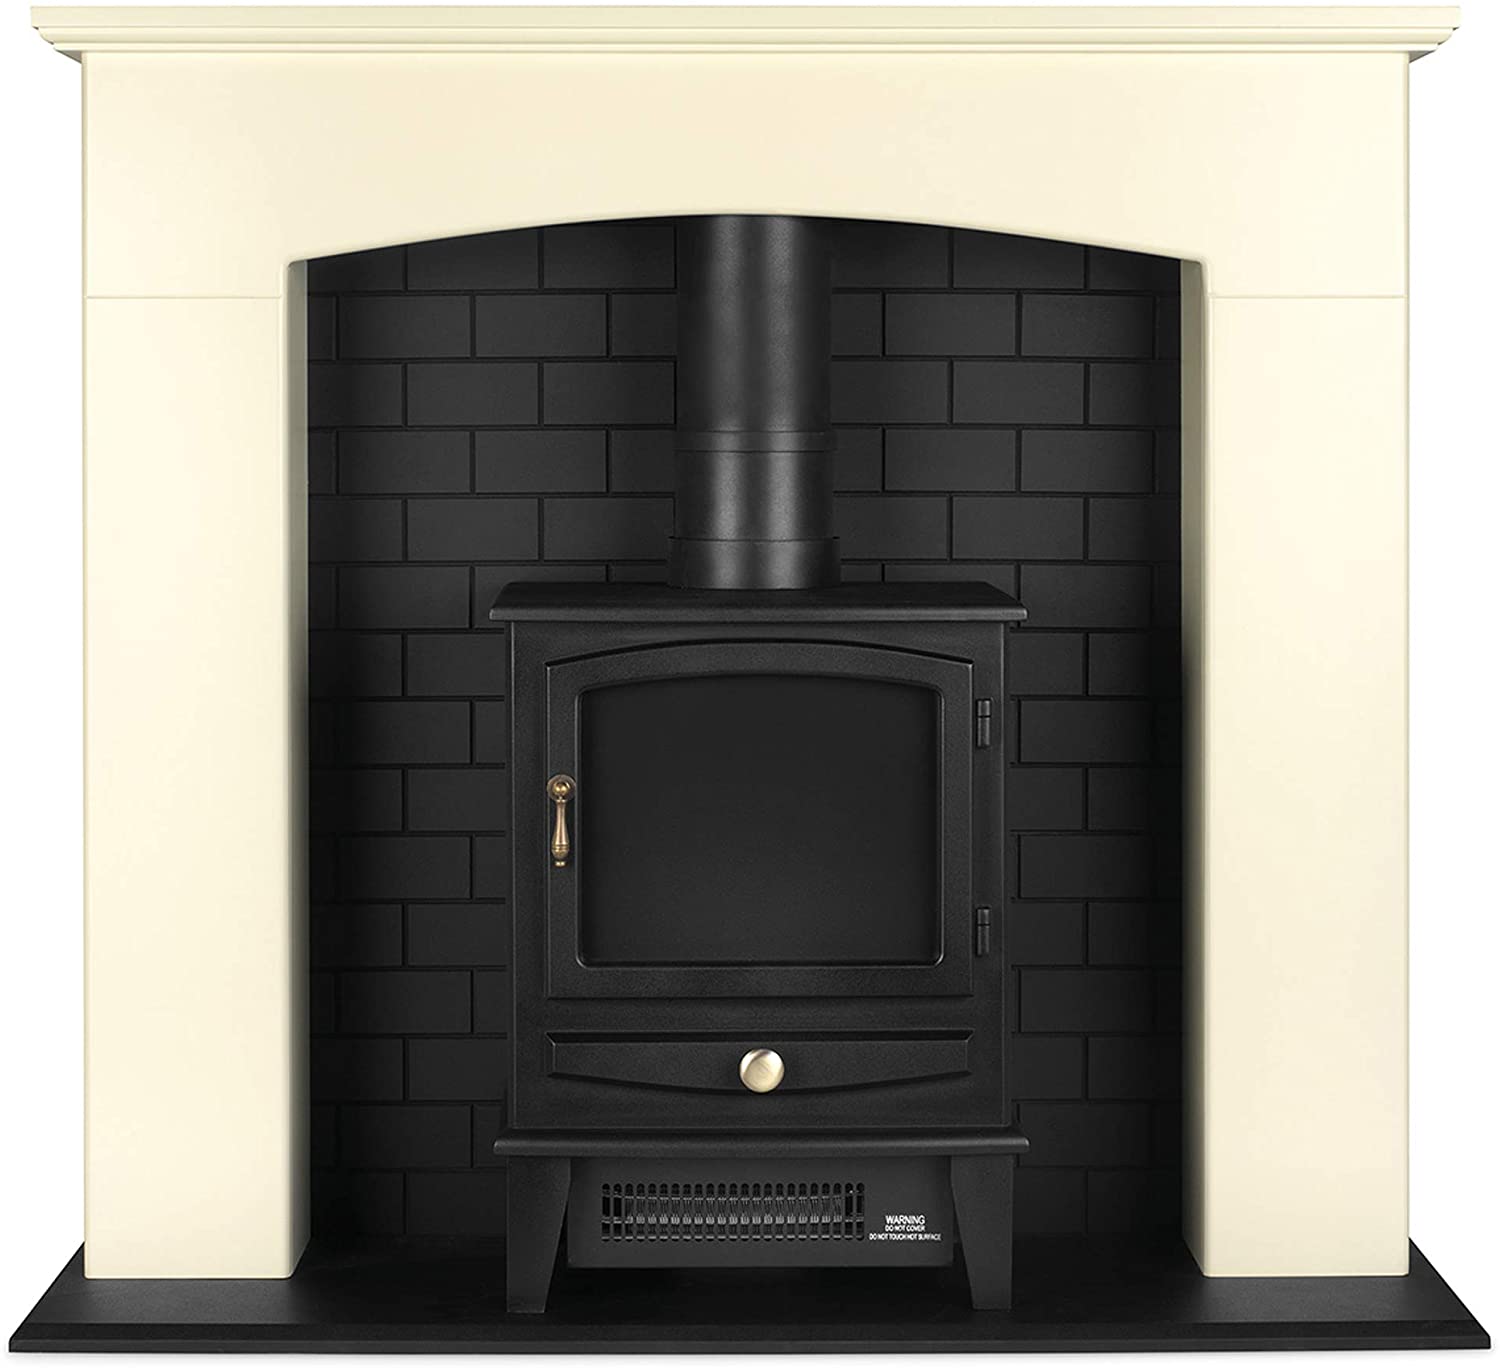 Diy Fireplace Surround Ideas Inspirational Beldray Eh1735stk Messina Electric Fire Stove Suite and Surround Cream Black Brick Effect Led Coals 1000 2000 W